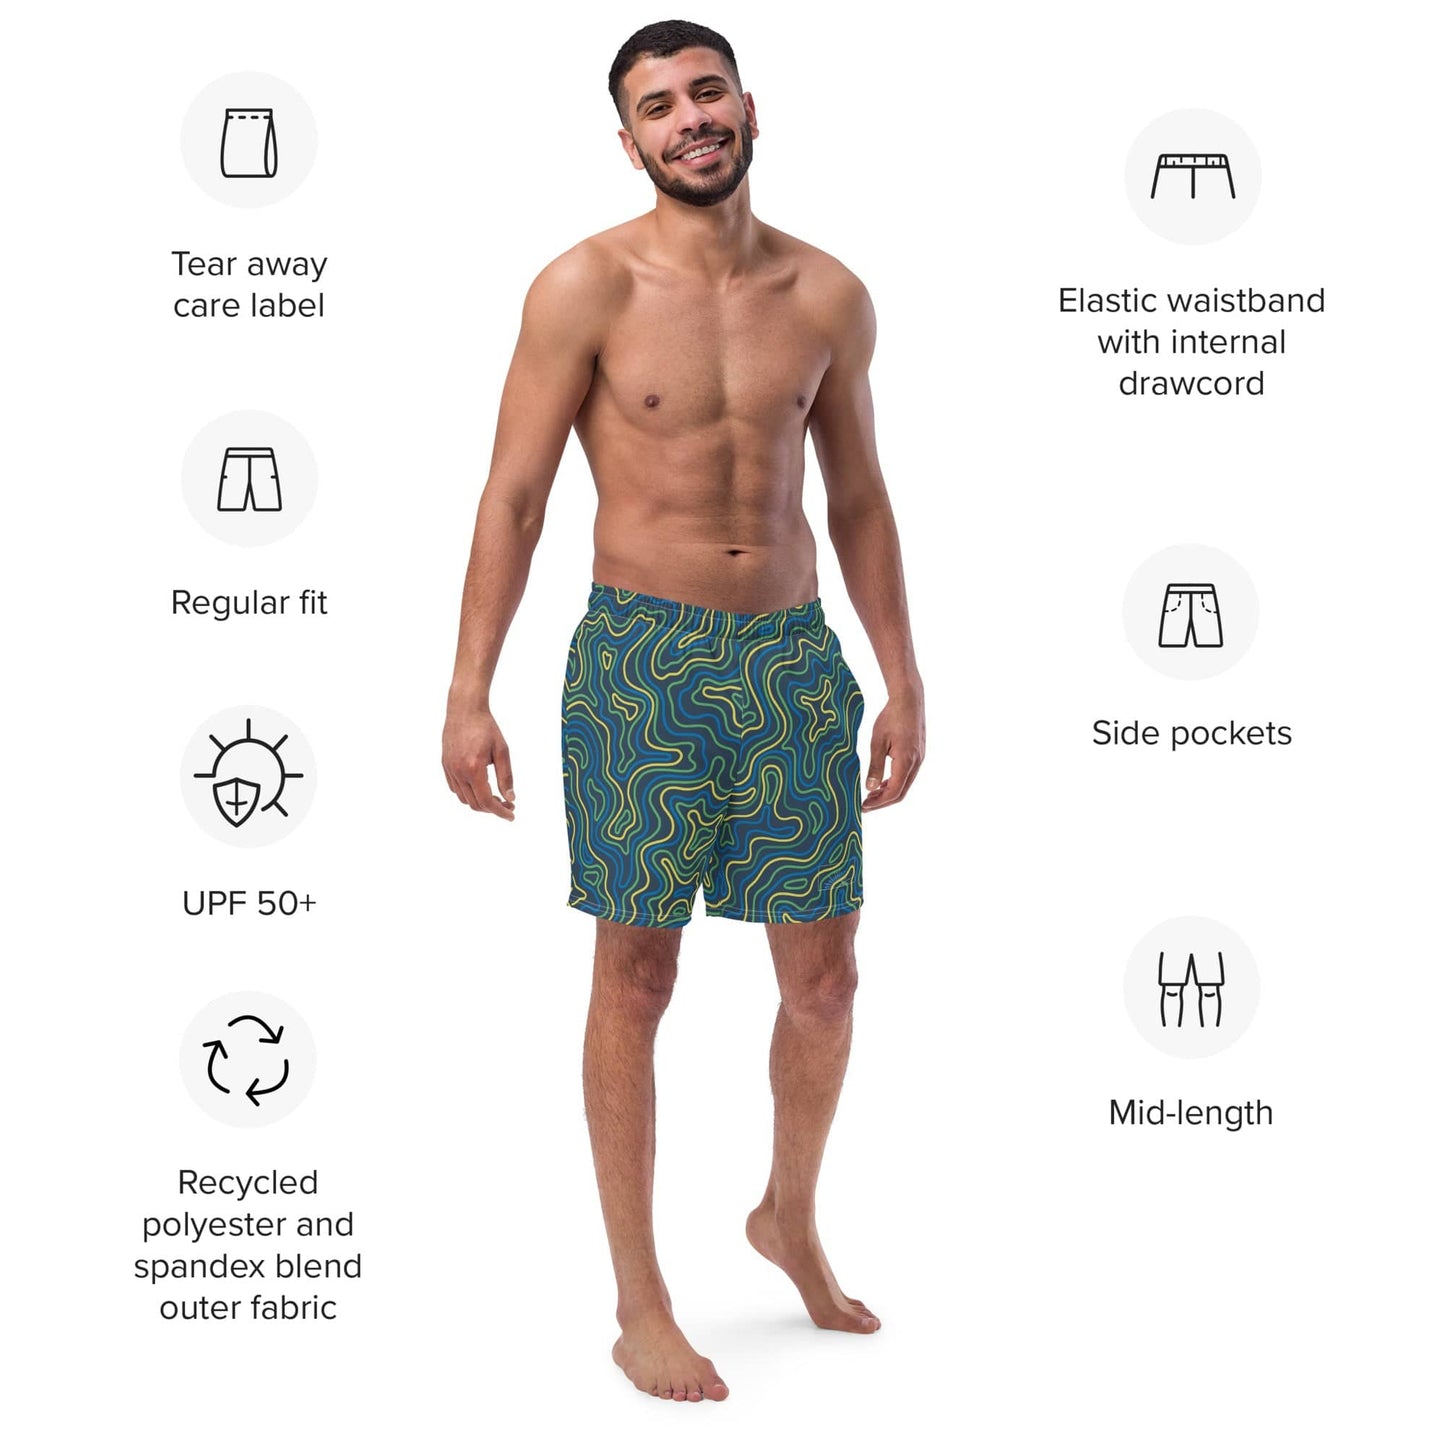 Local Summer Collective Trail Off All-Over Print Recycled Boardshorts